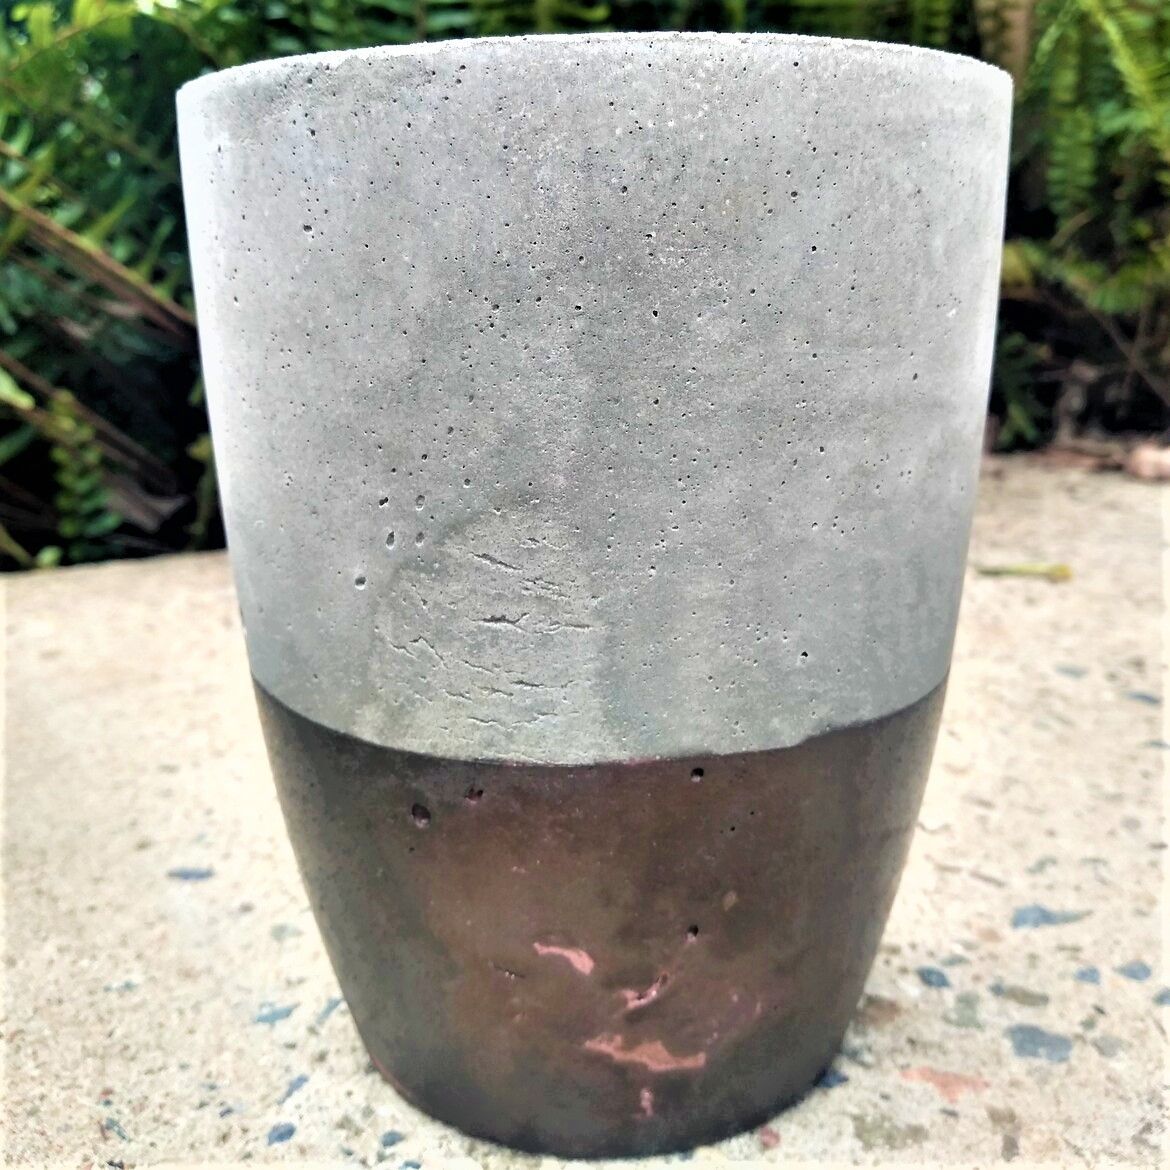 How to make cement planter pots | Bunnings Workshop community